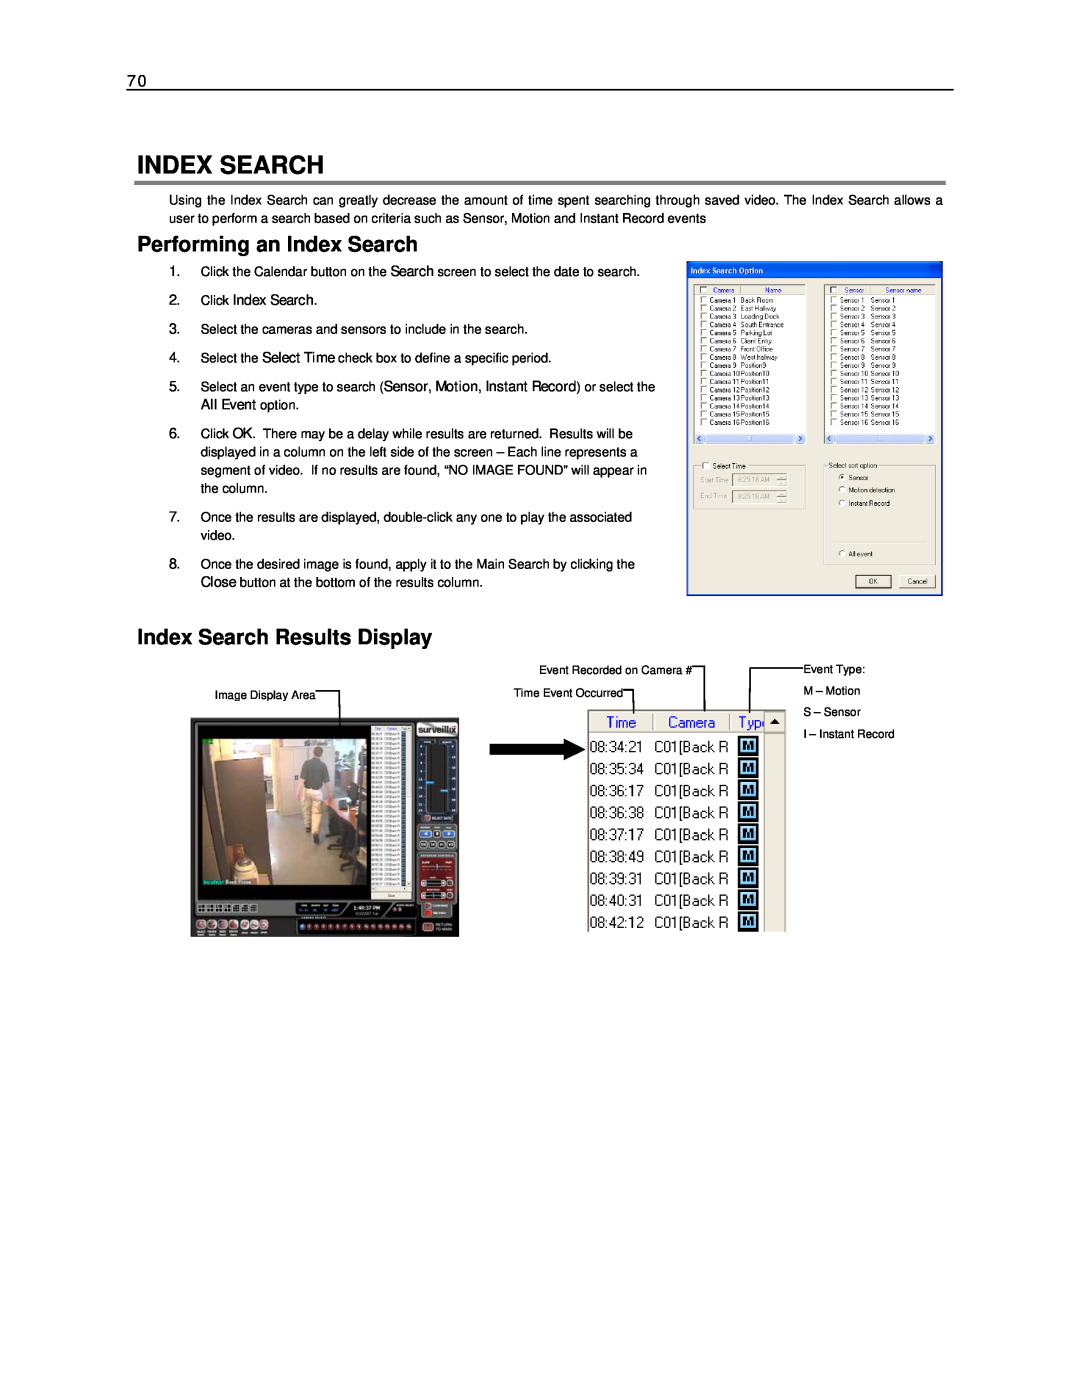 Toshiba NVS16-X, NVS32-X, NVS8-X user manual Performing an Index Search, Index Search Results Display, Click Index Search 